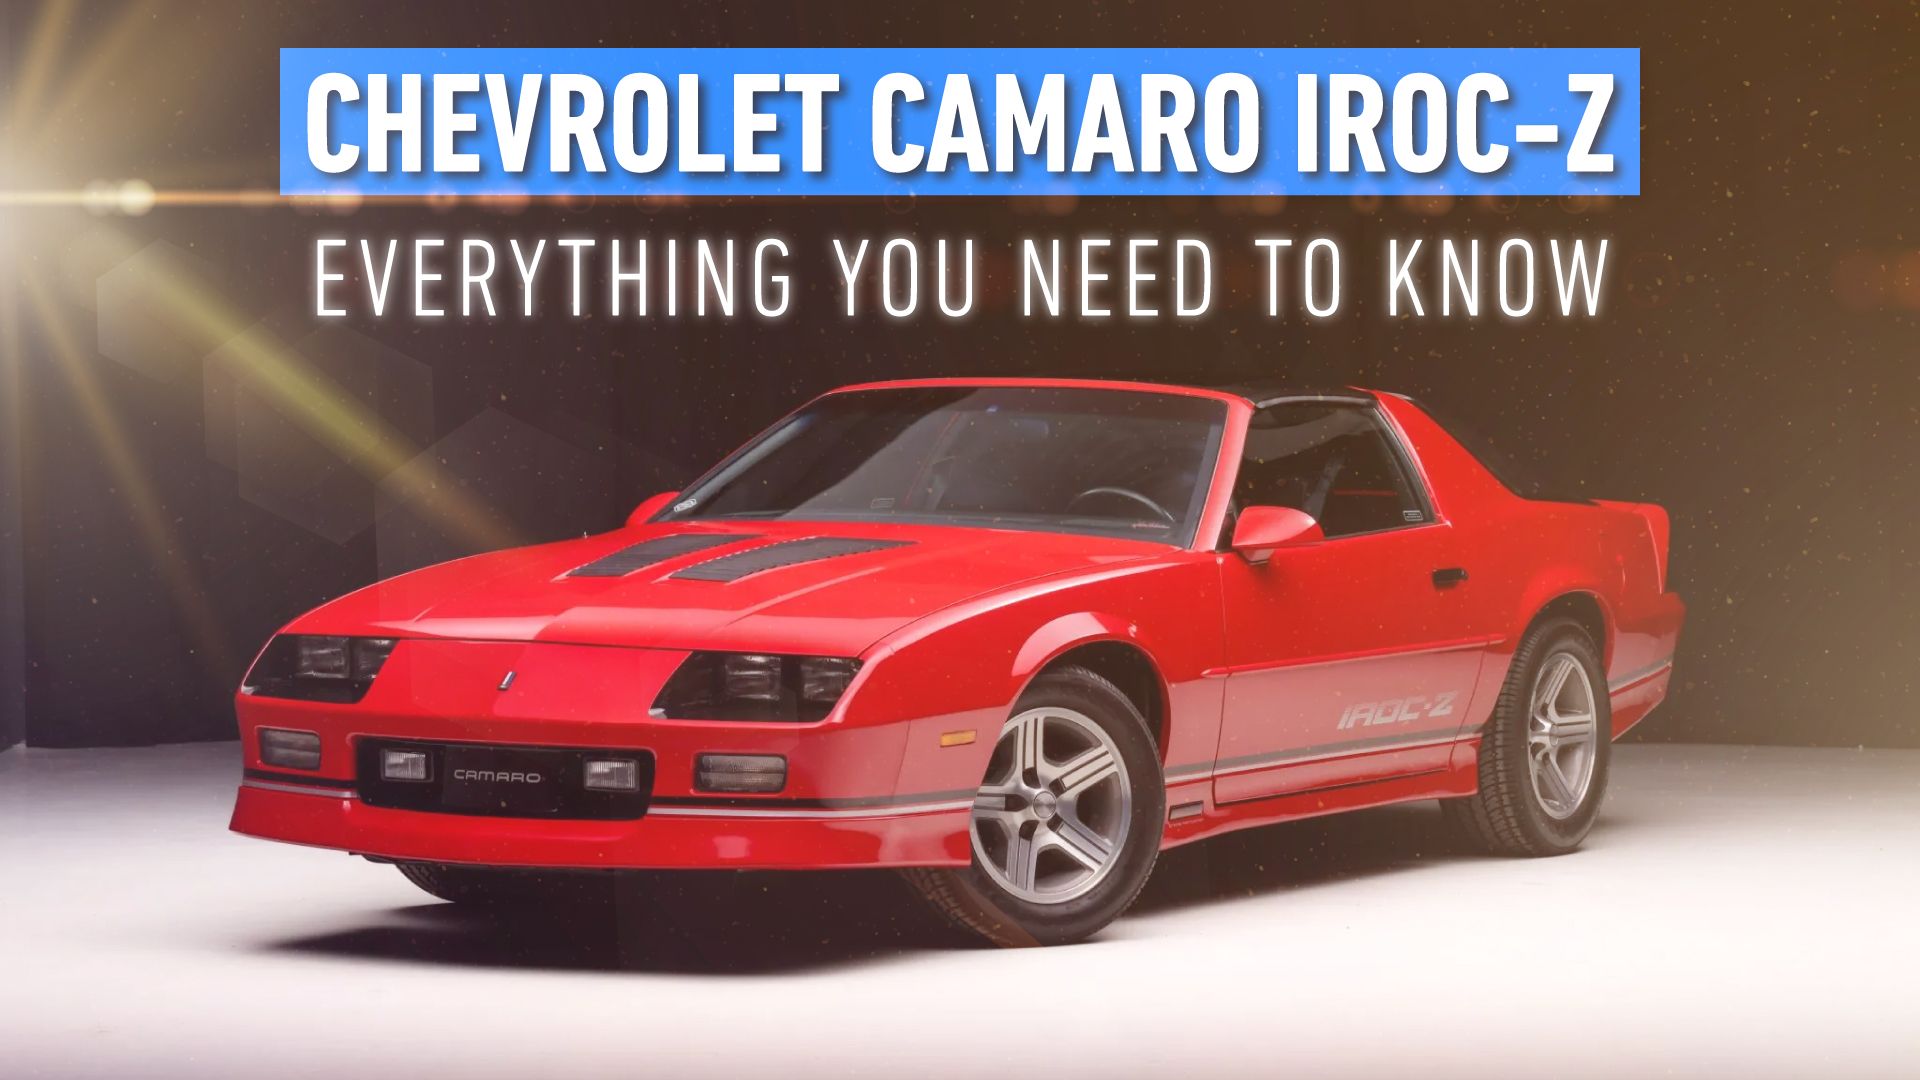 Everything You Need To Know About The Chevy Camaro IROC - Z